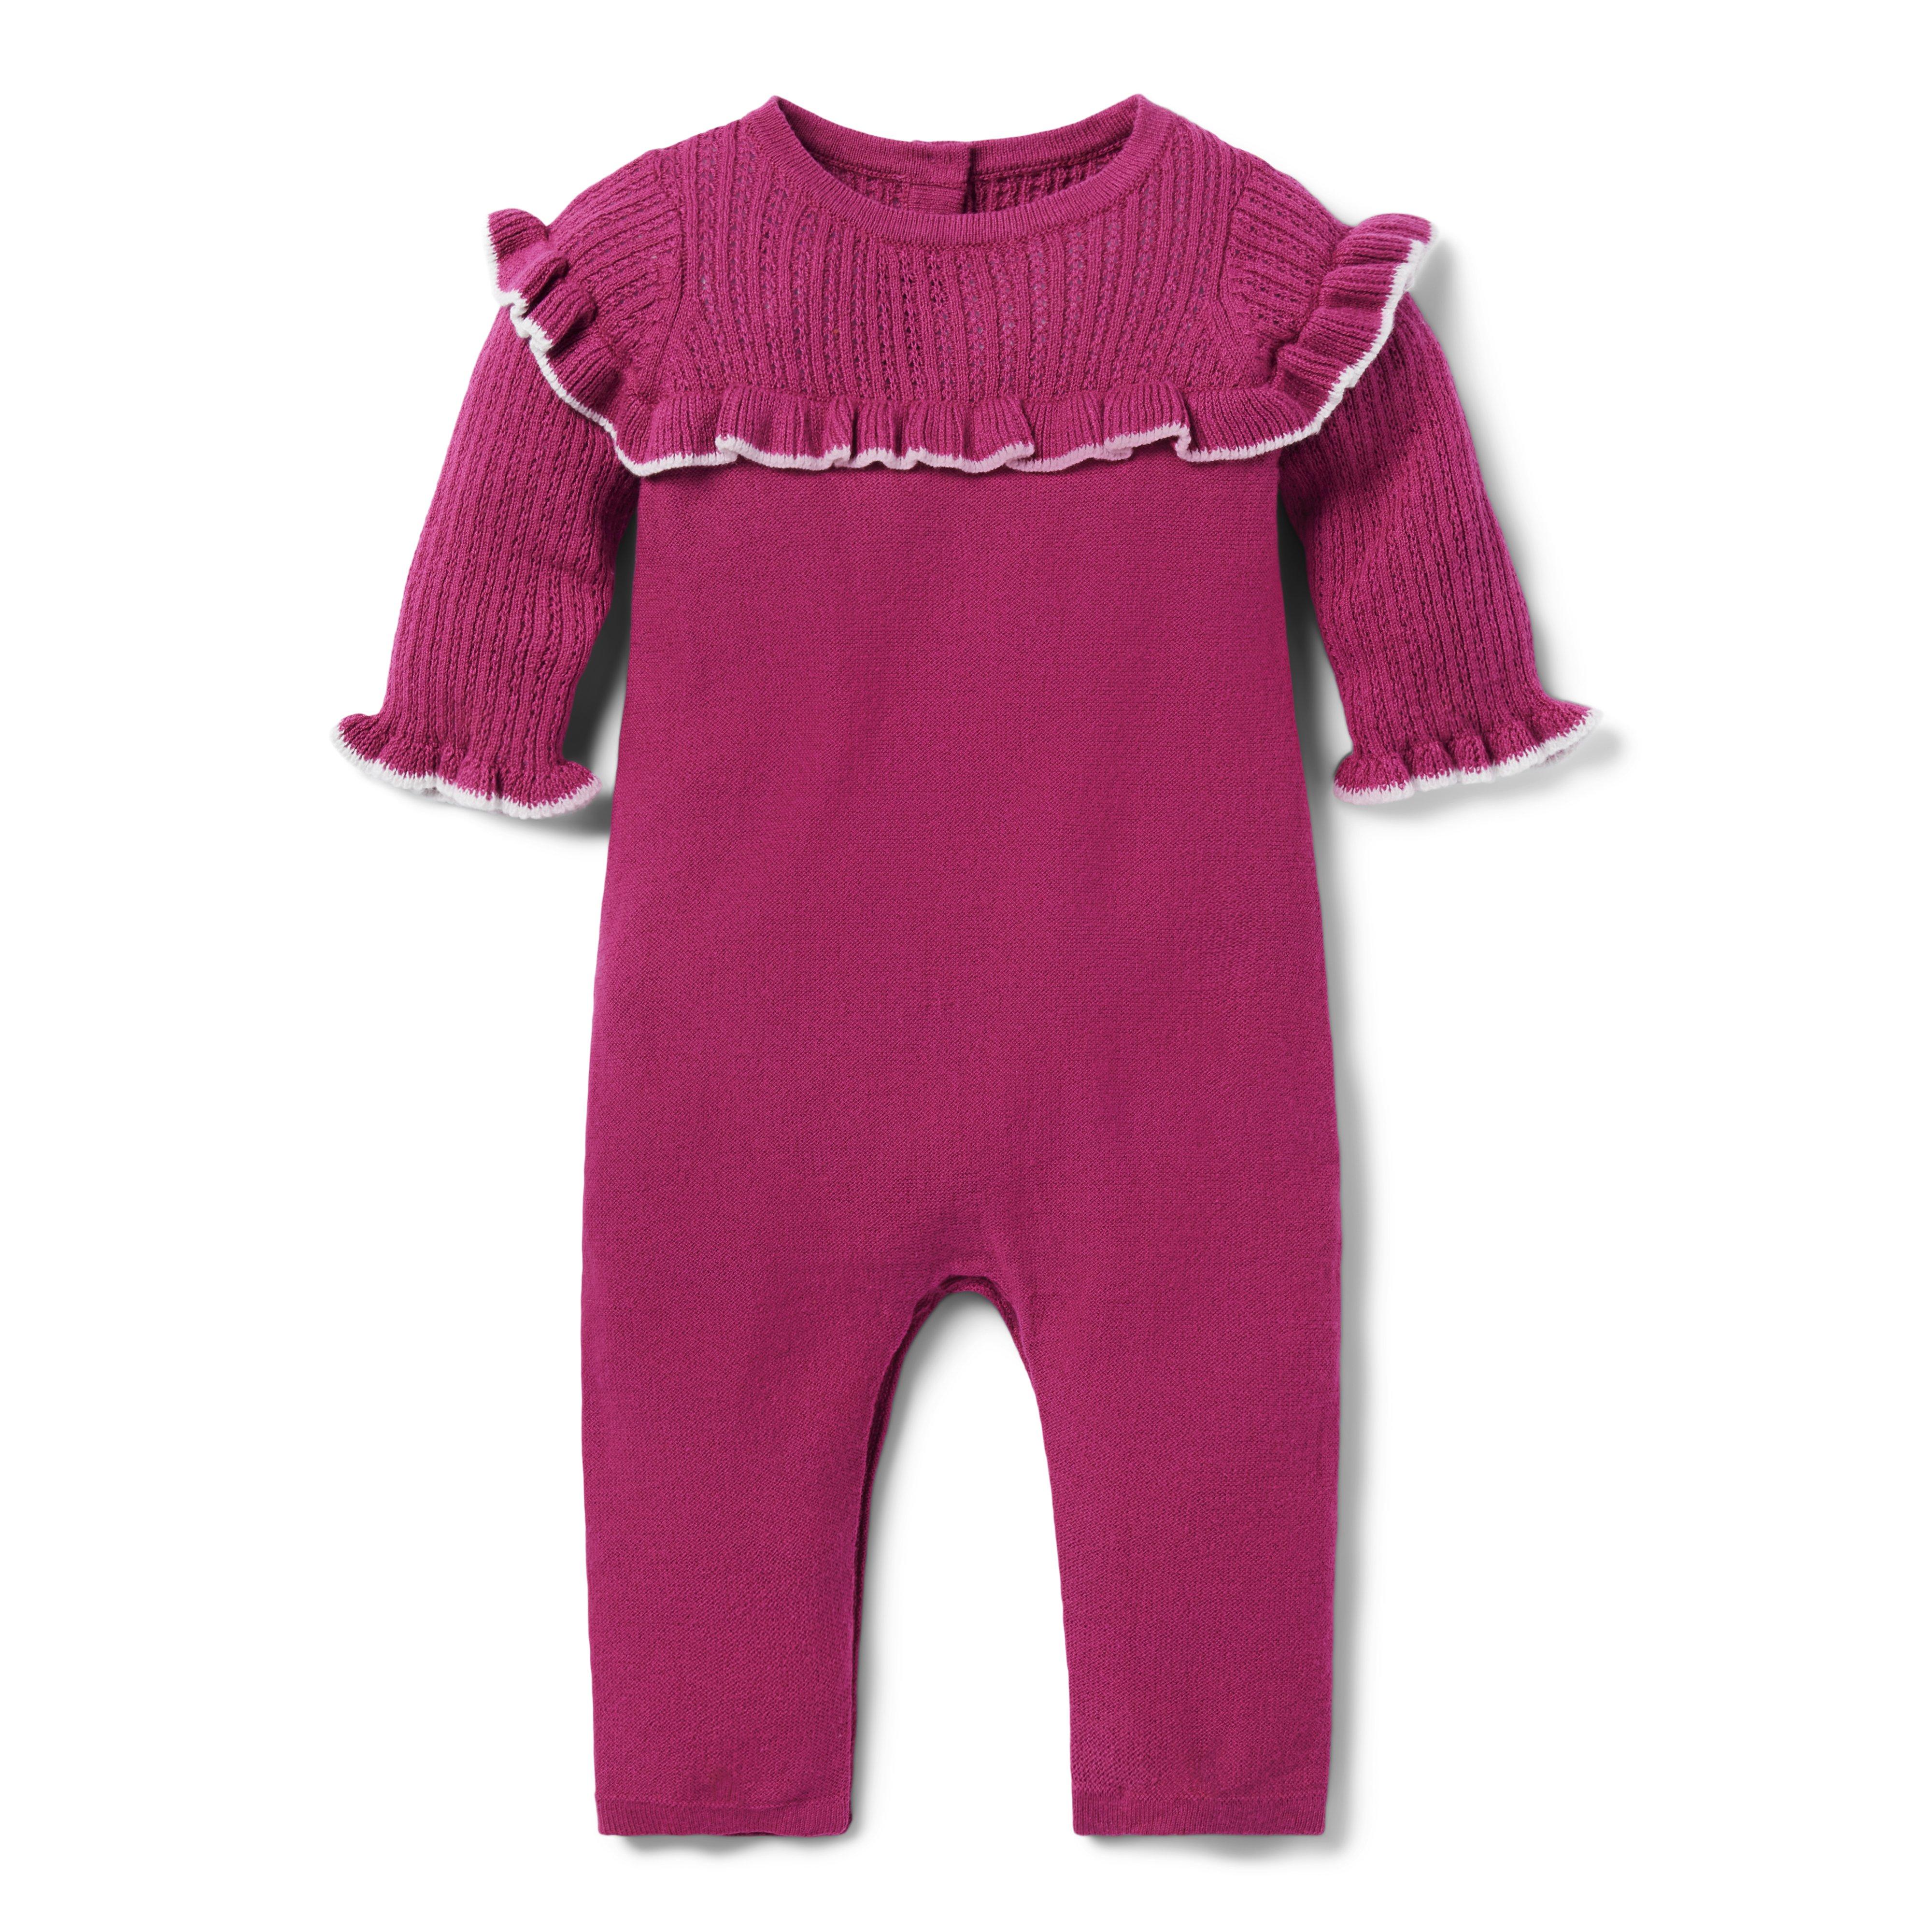 Baby Pointelle Ruffle One-Piece image number 0